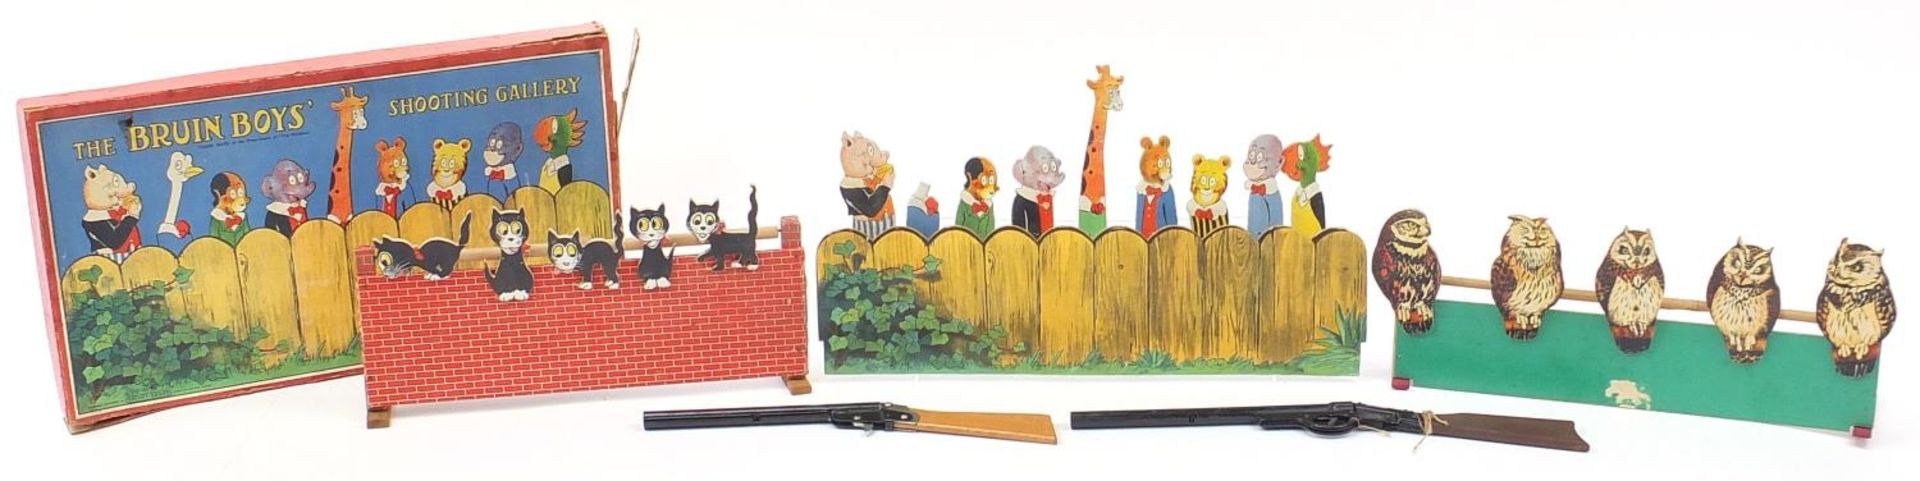 Vintage Spear's Bruin Boy's Shooting Gallery with box :For Further Condition Reports Please Visit